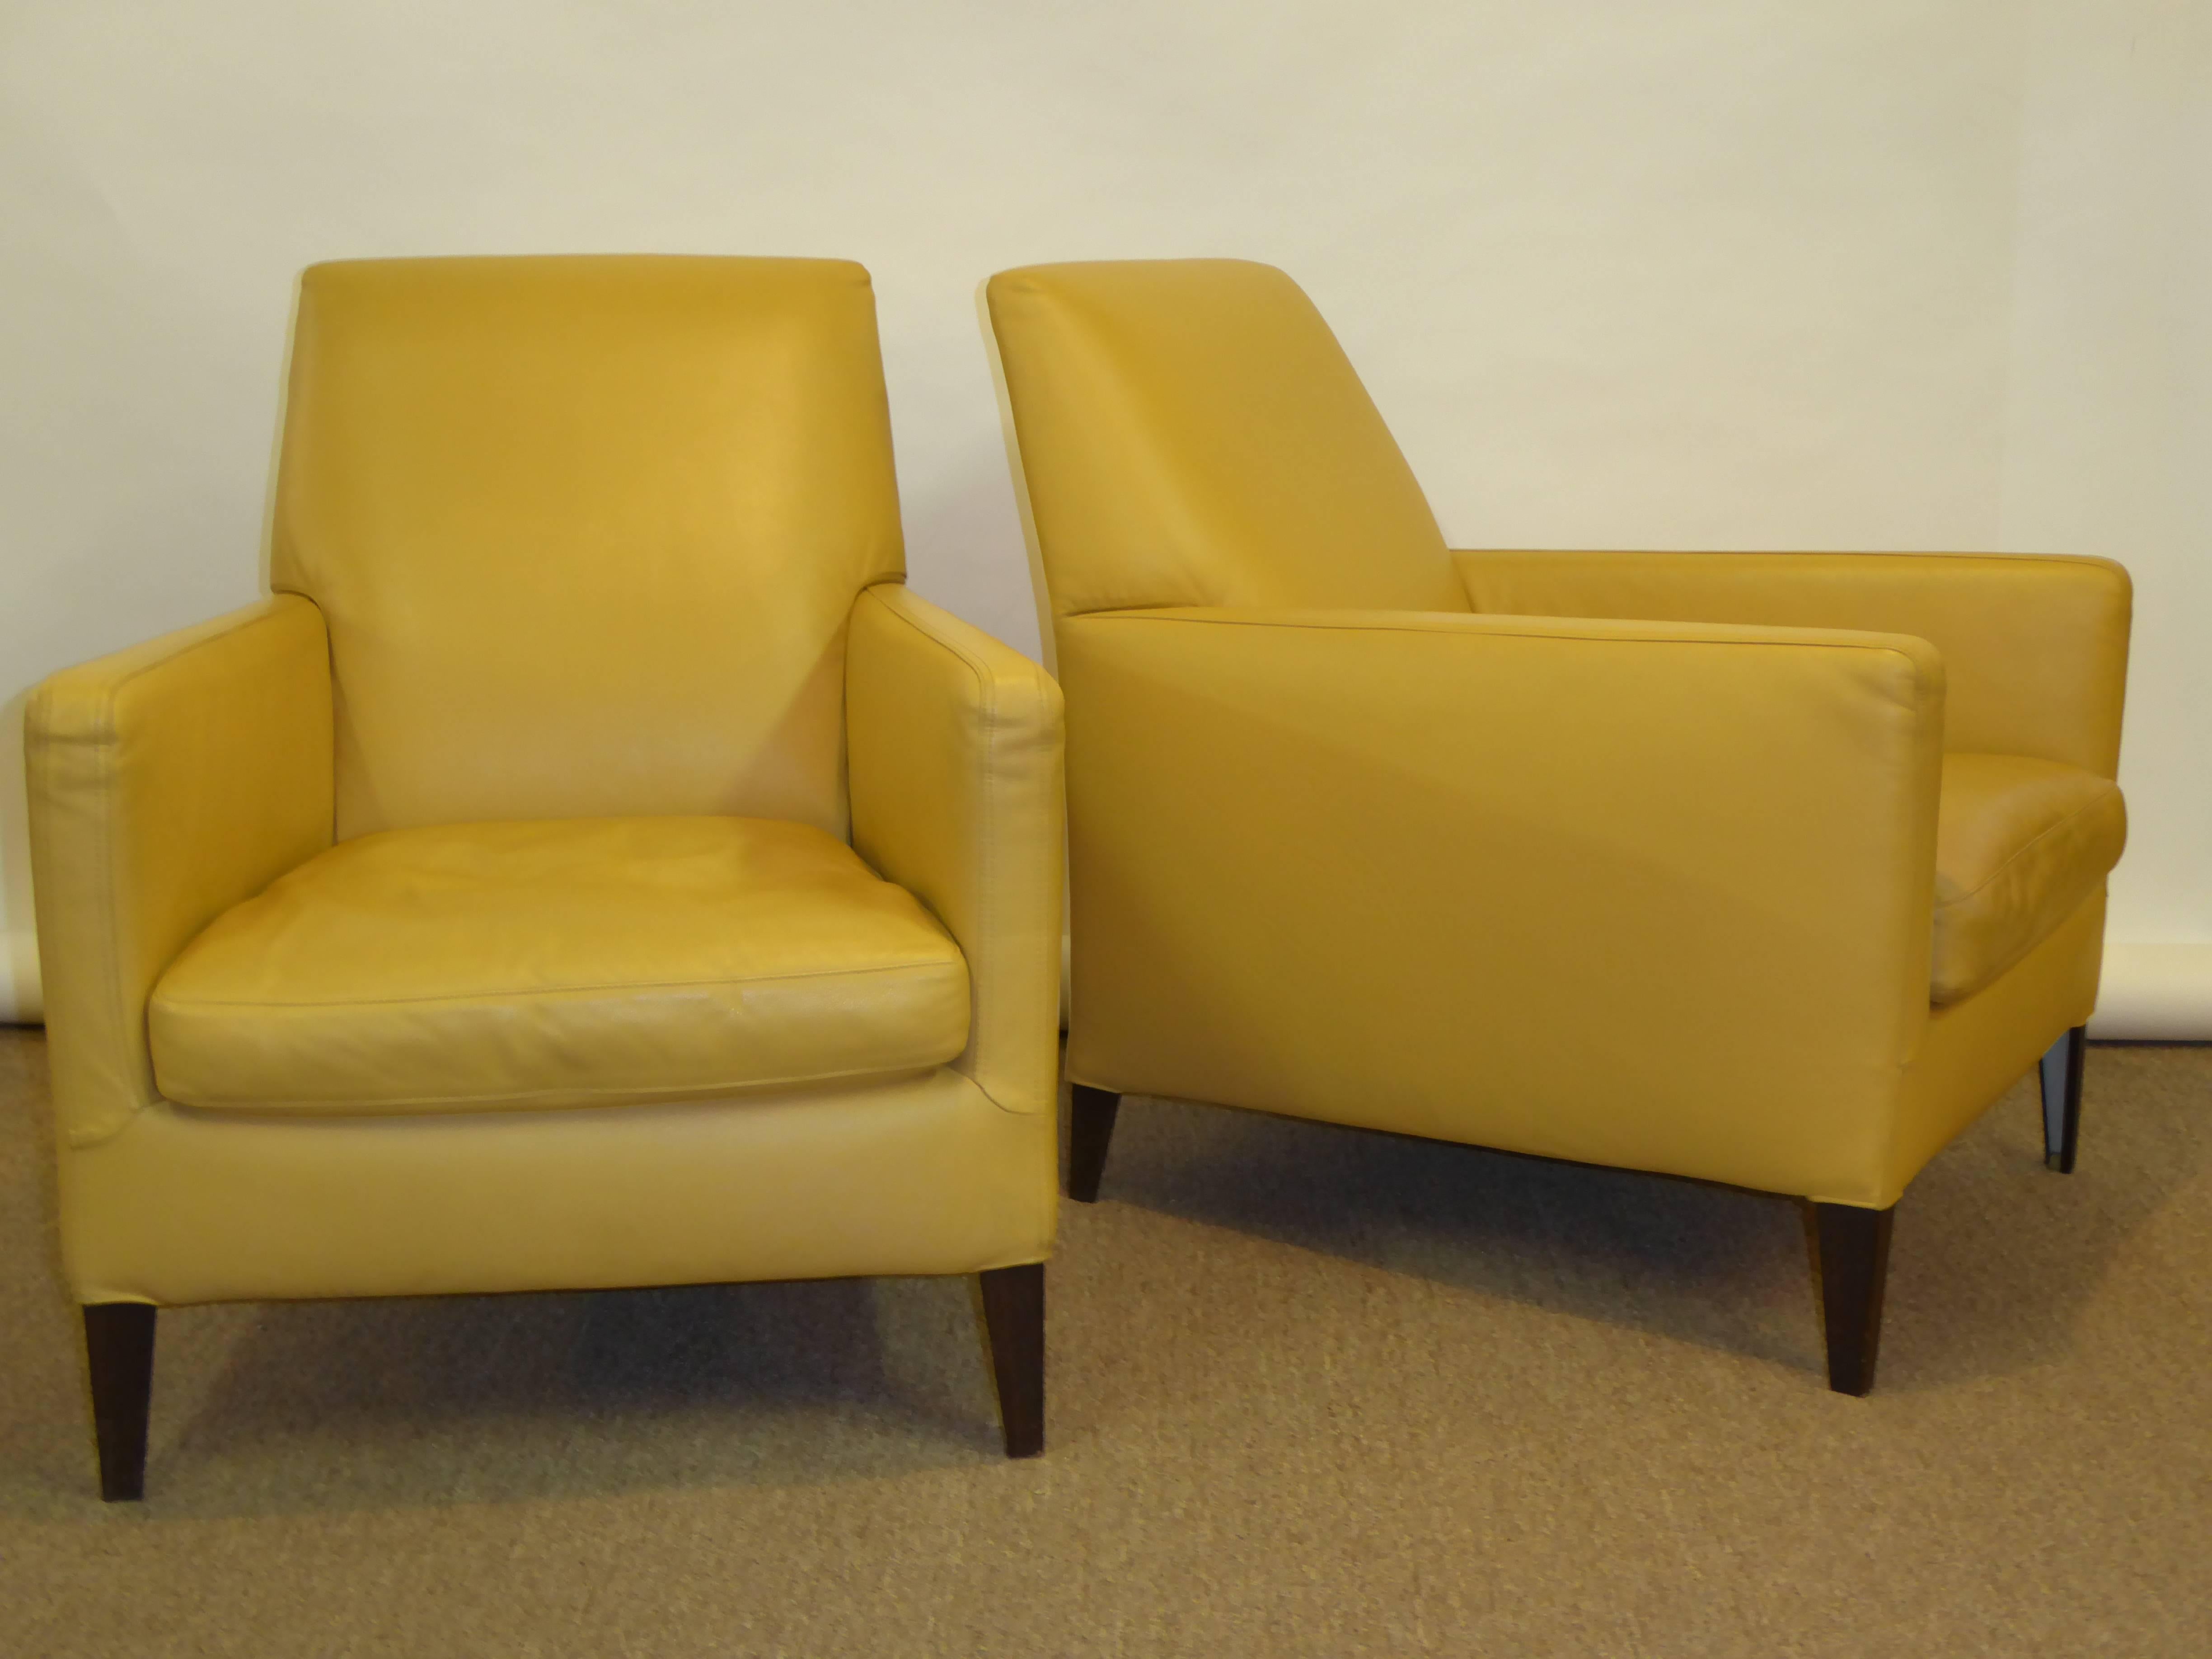 In mustard yellow leather, a pair of Italian lounge chairs designed by Antonio Citterio for Maxalto made by B&B Italia. In sumptuous Italian leather, this pair, named "Dandy", features a tapering shape with the front wider than the